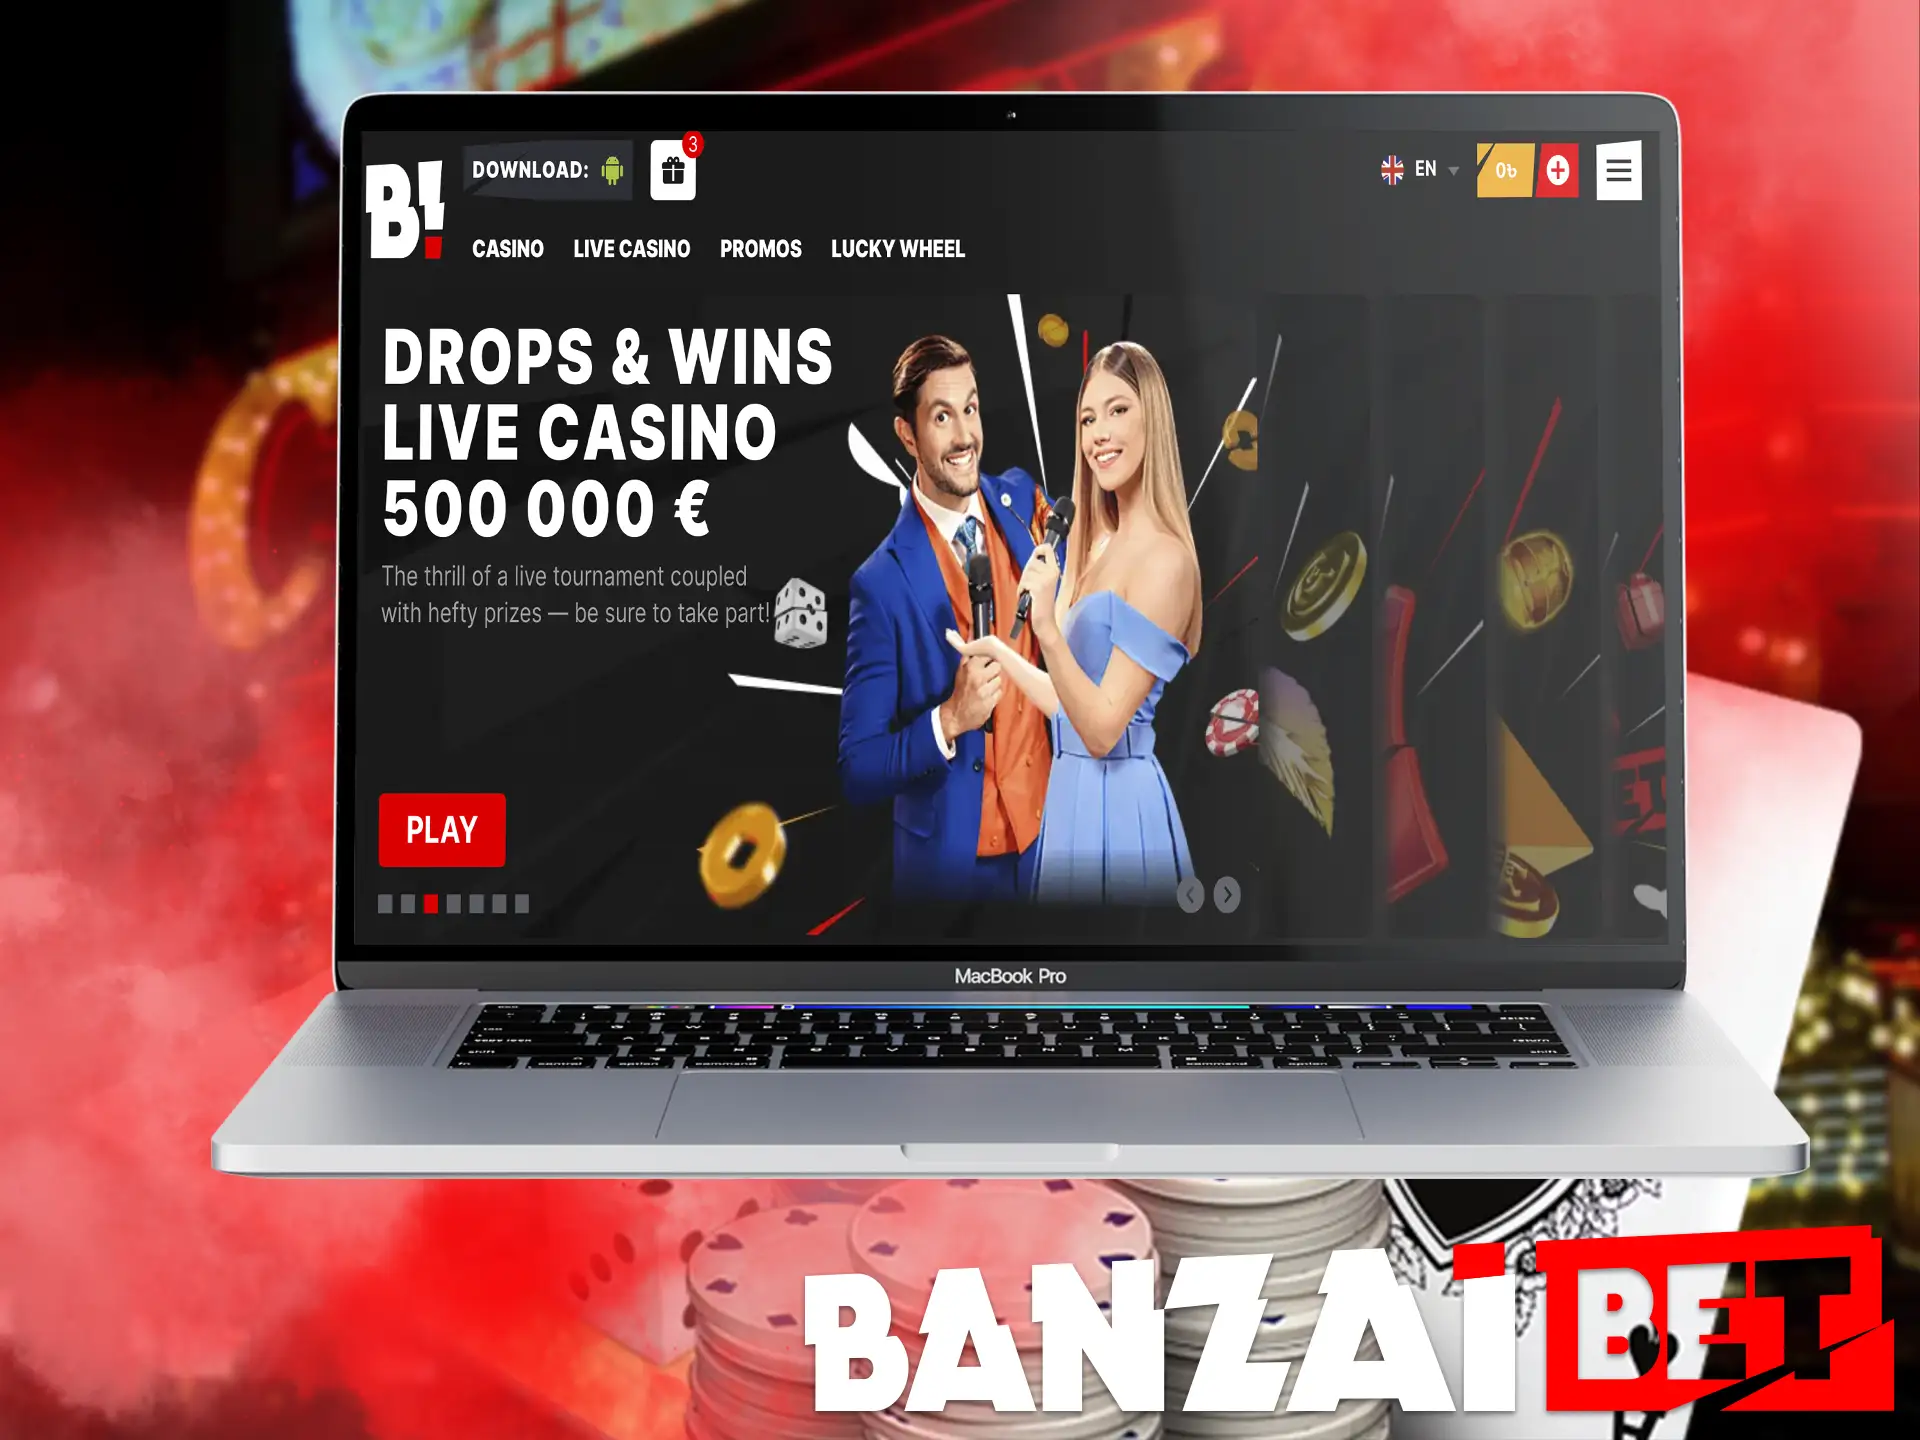 A collection of different genres of exciting gambling game Banzai Bet, the process takes place with a live person in real time.